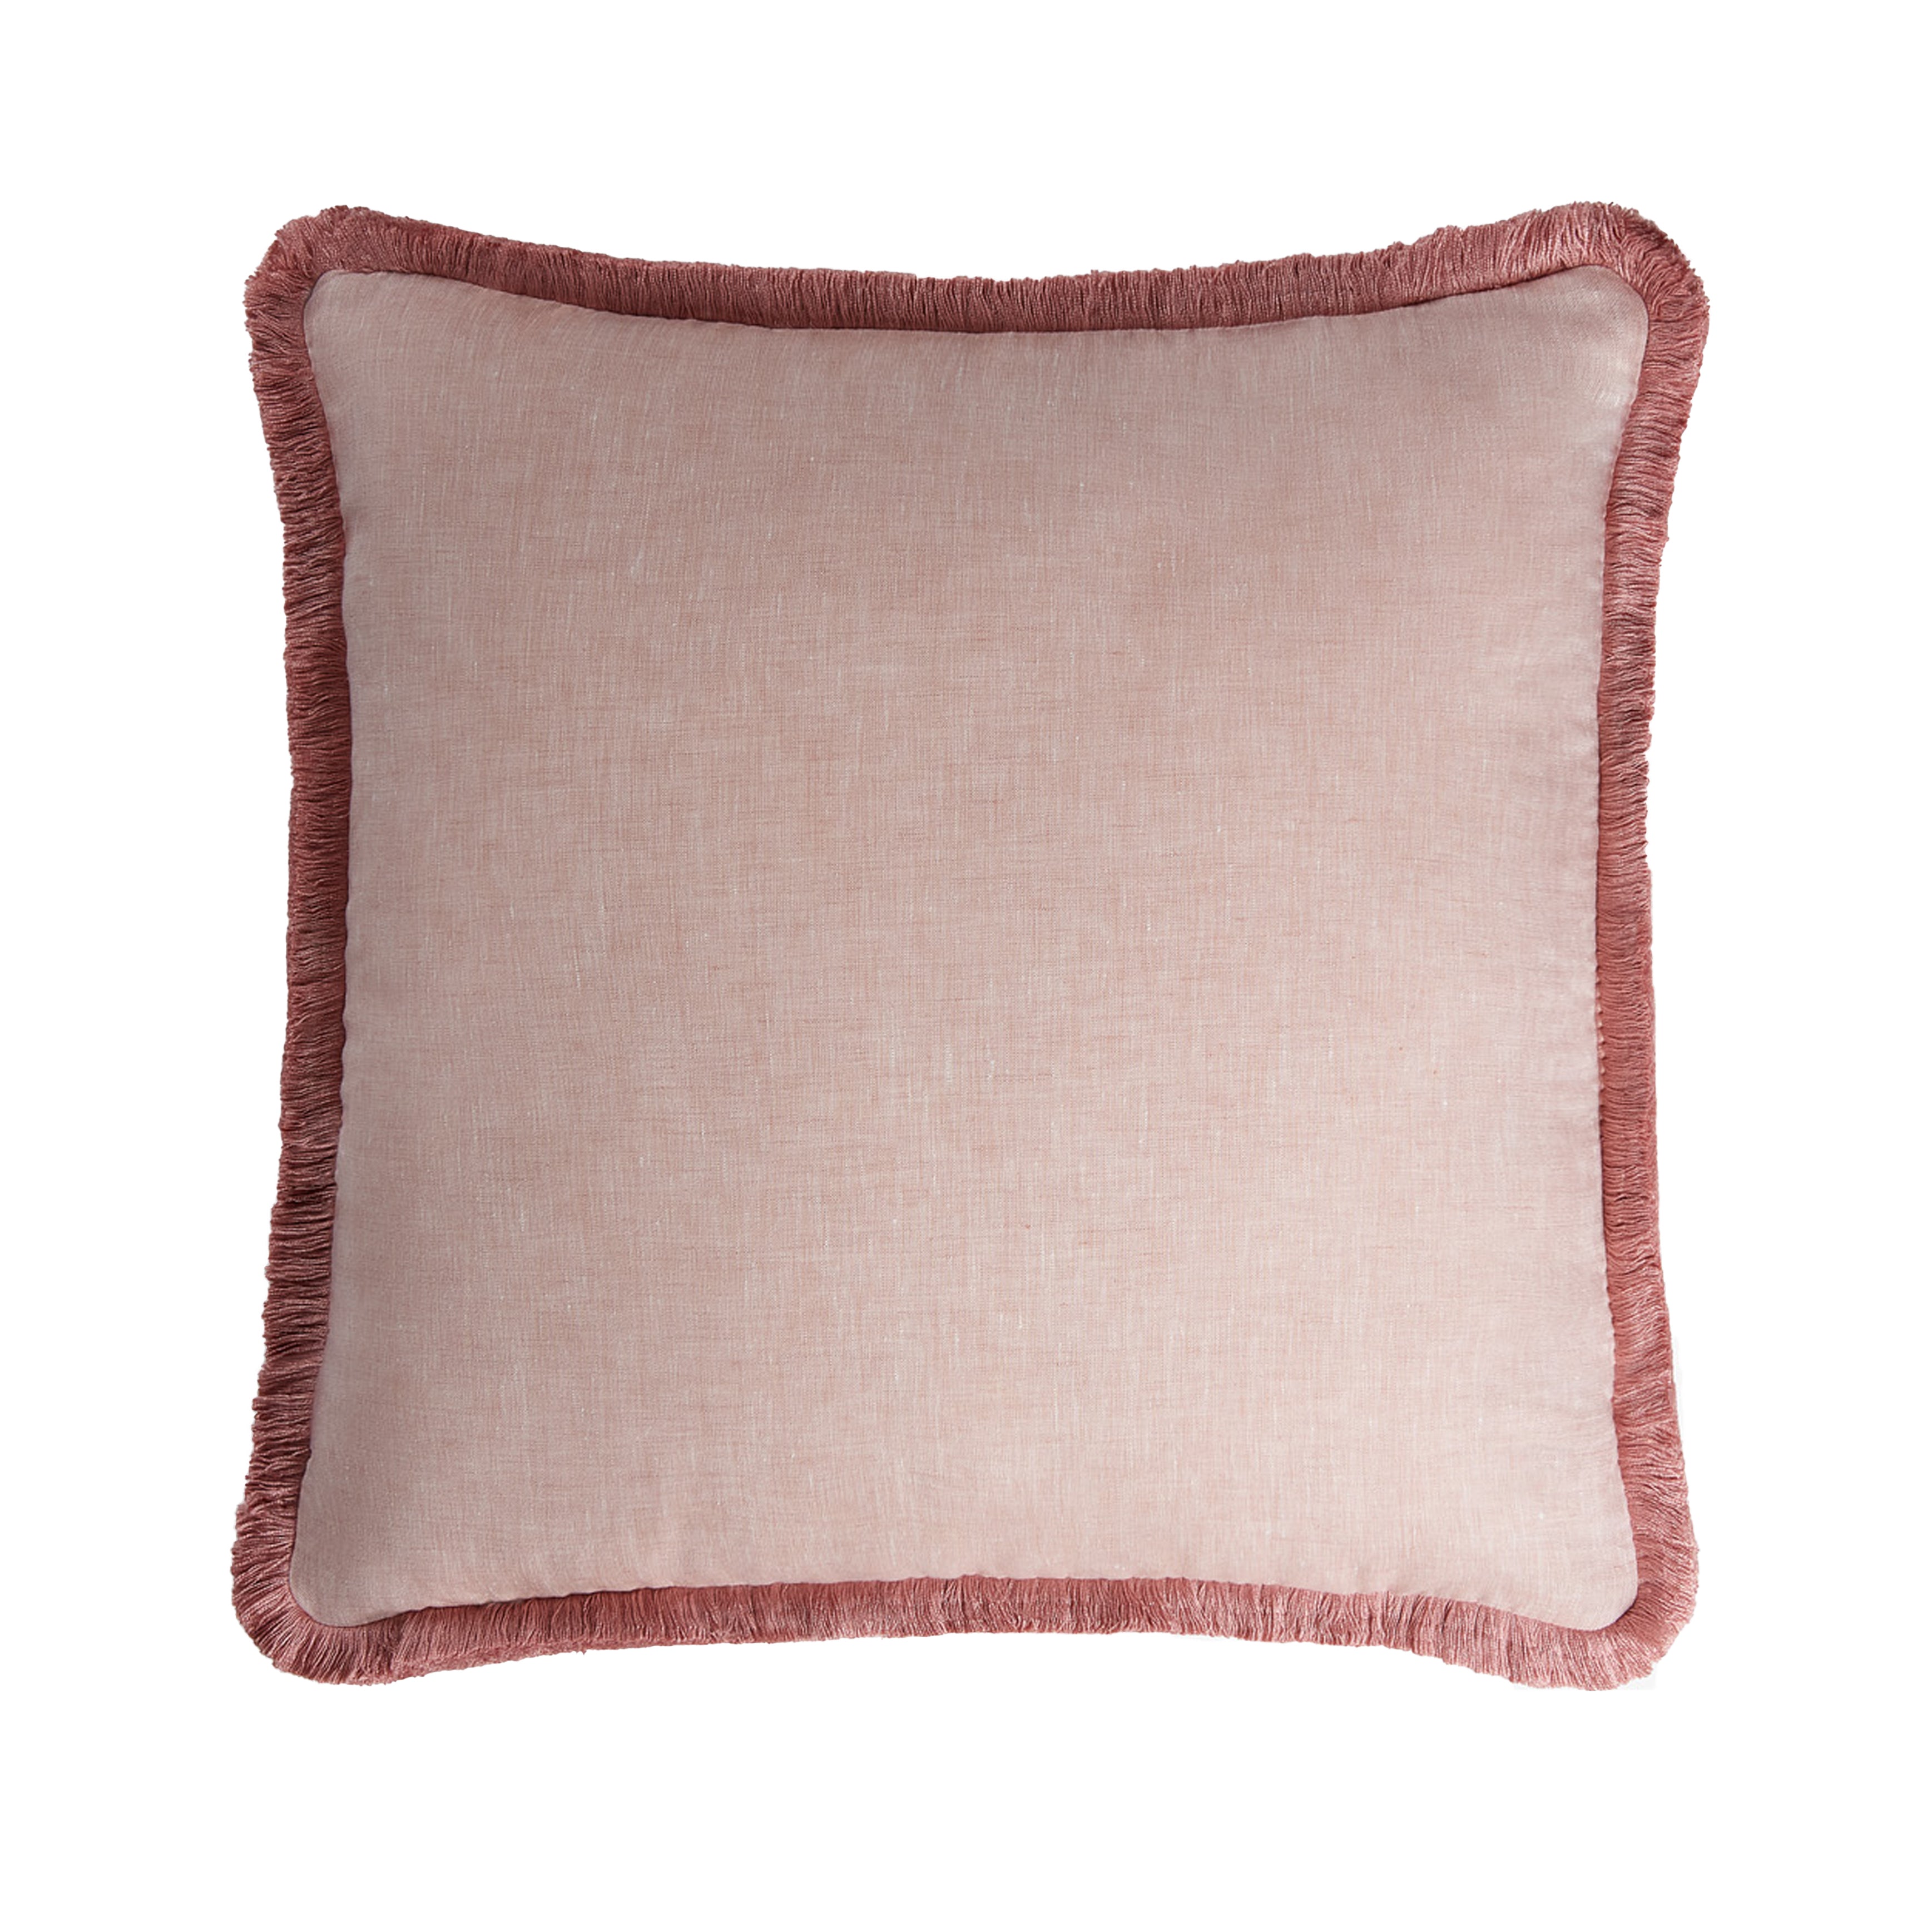 Lo Decor Light Pink Linen Pillow with Fringes